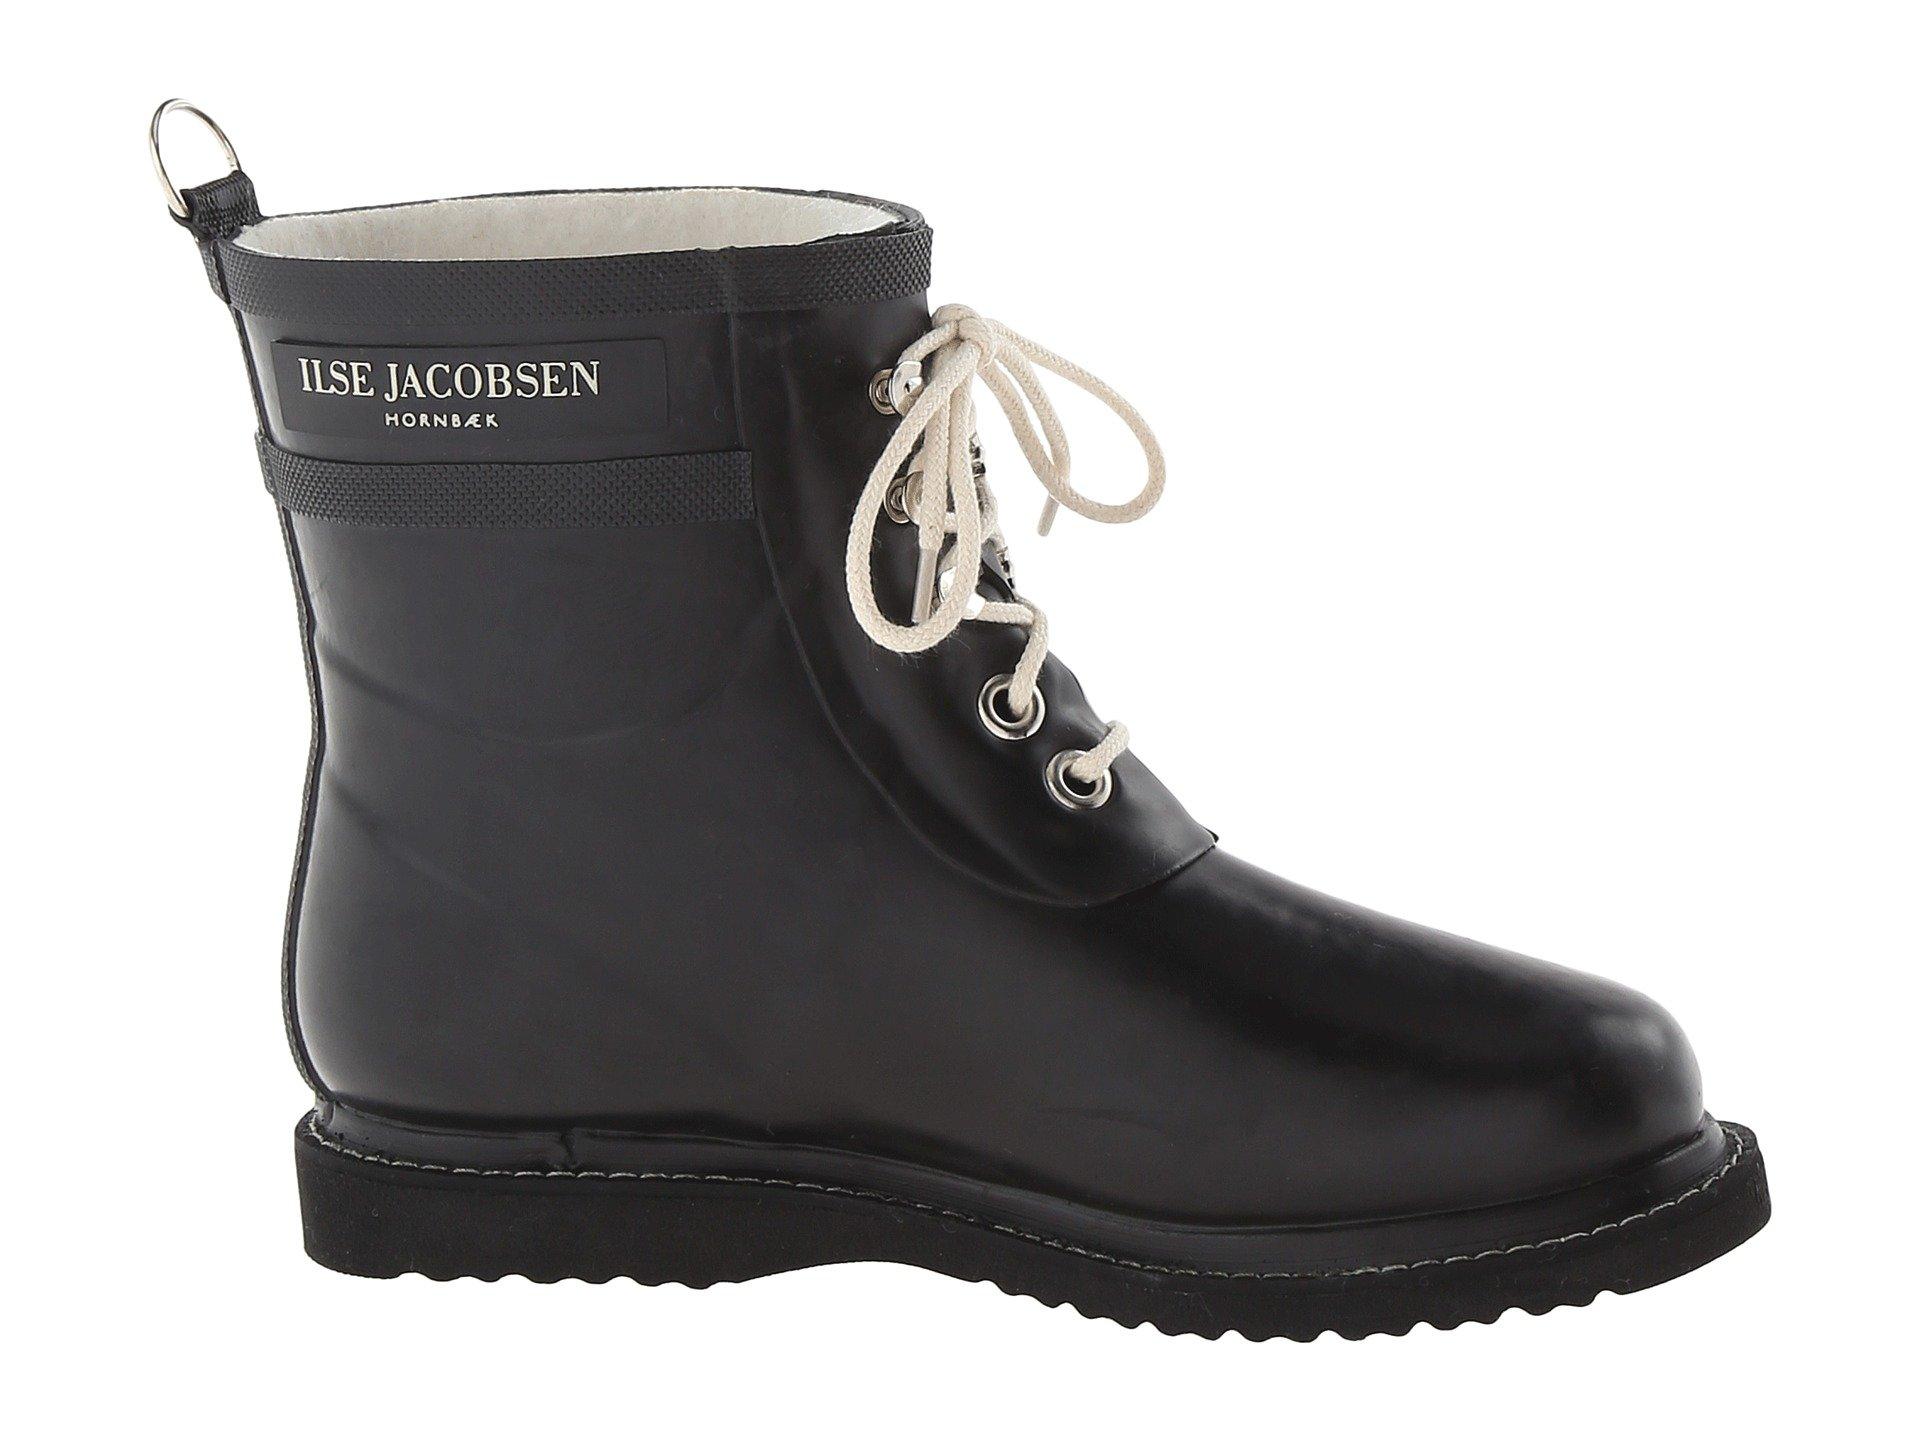 Ilse Jacobsen Rub 2 (atmosphere) Women's Lace-up Boots in Black - Lyst